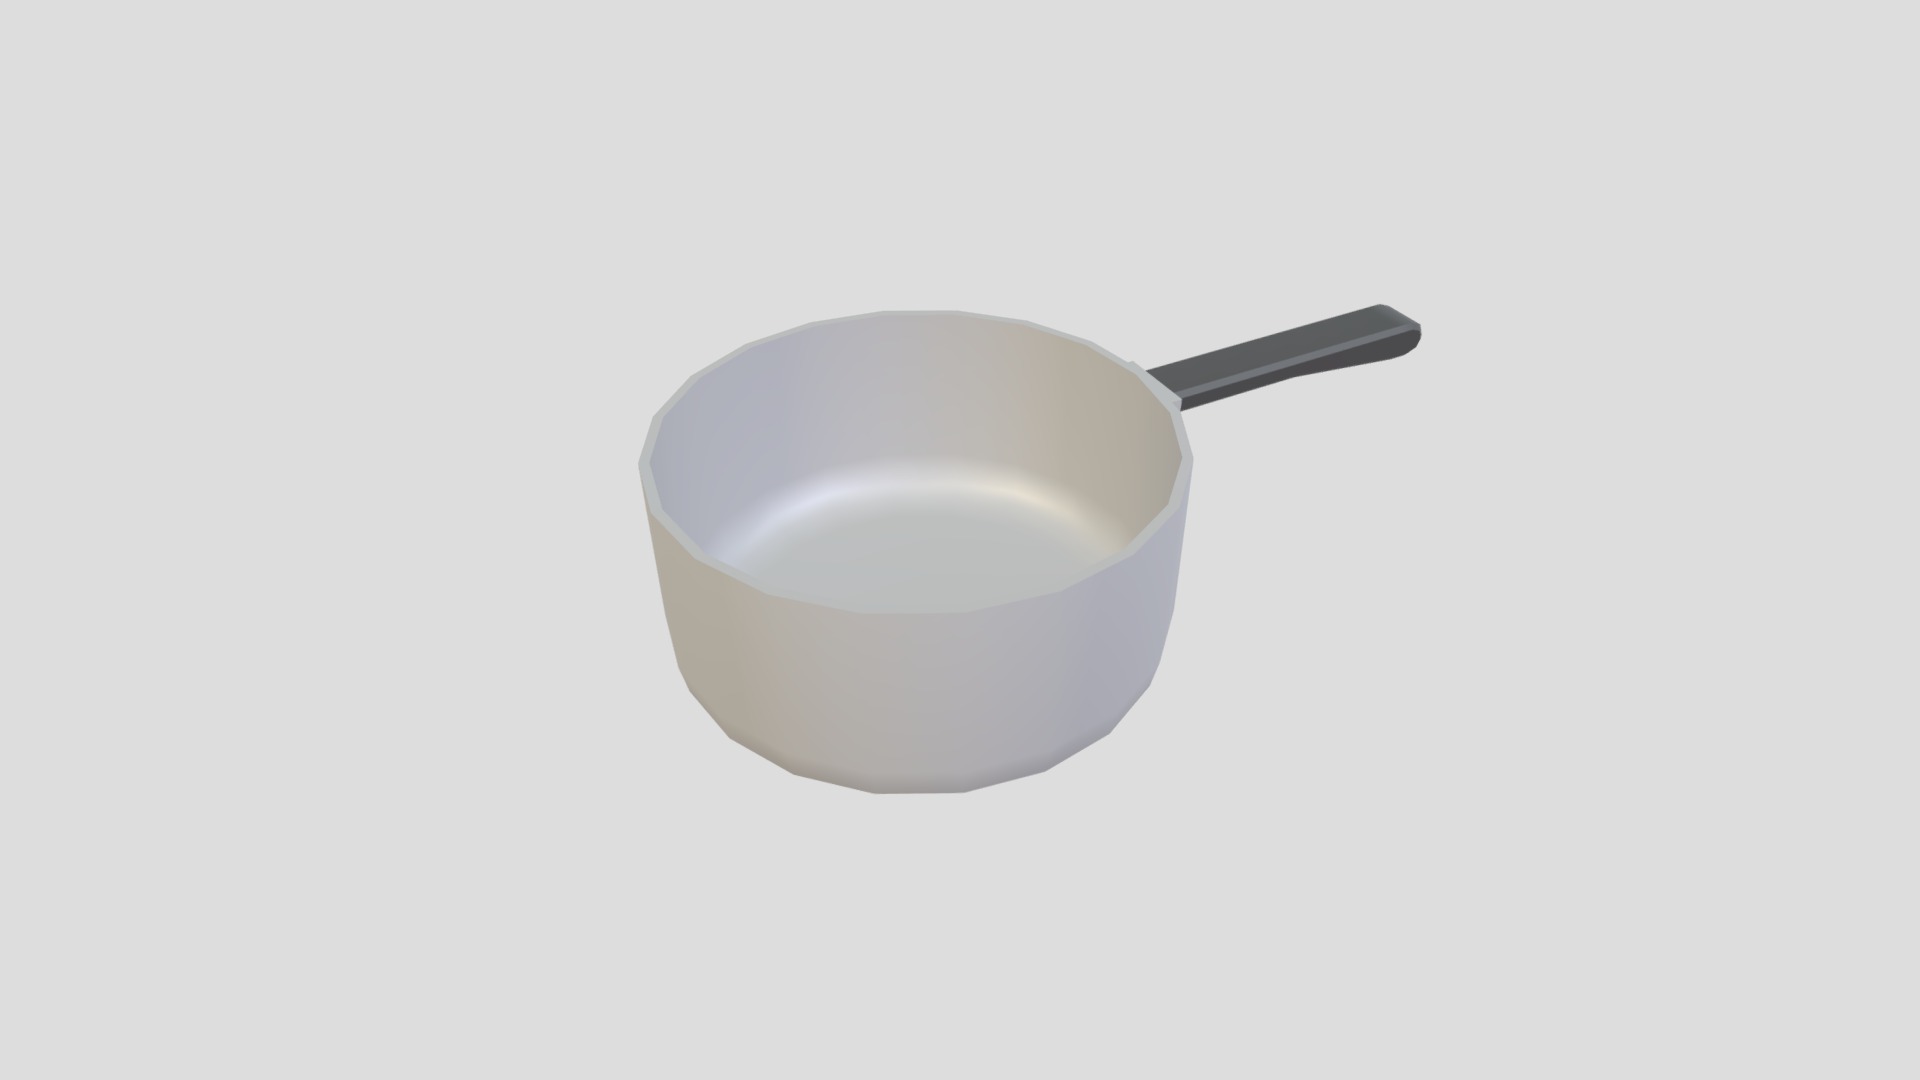 3D model Pot 3 - This is a 3D model of the Pot 3. The 3D model is about a white bowl with a black handle.